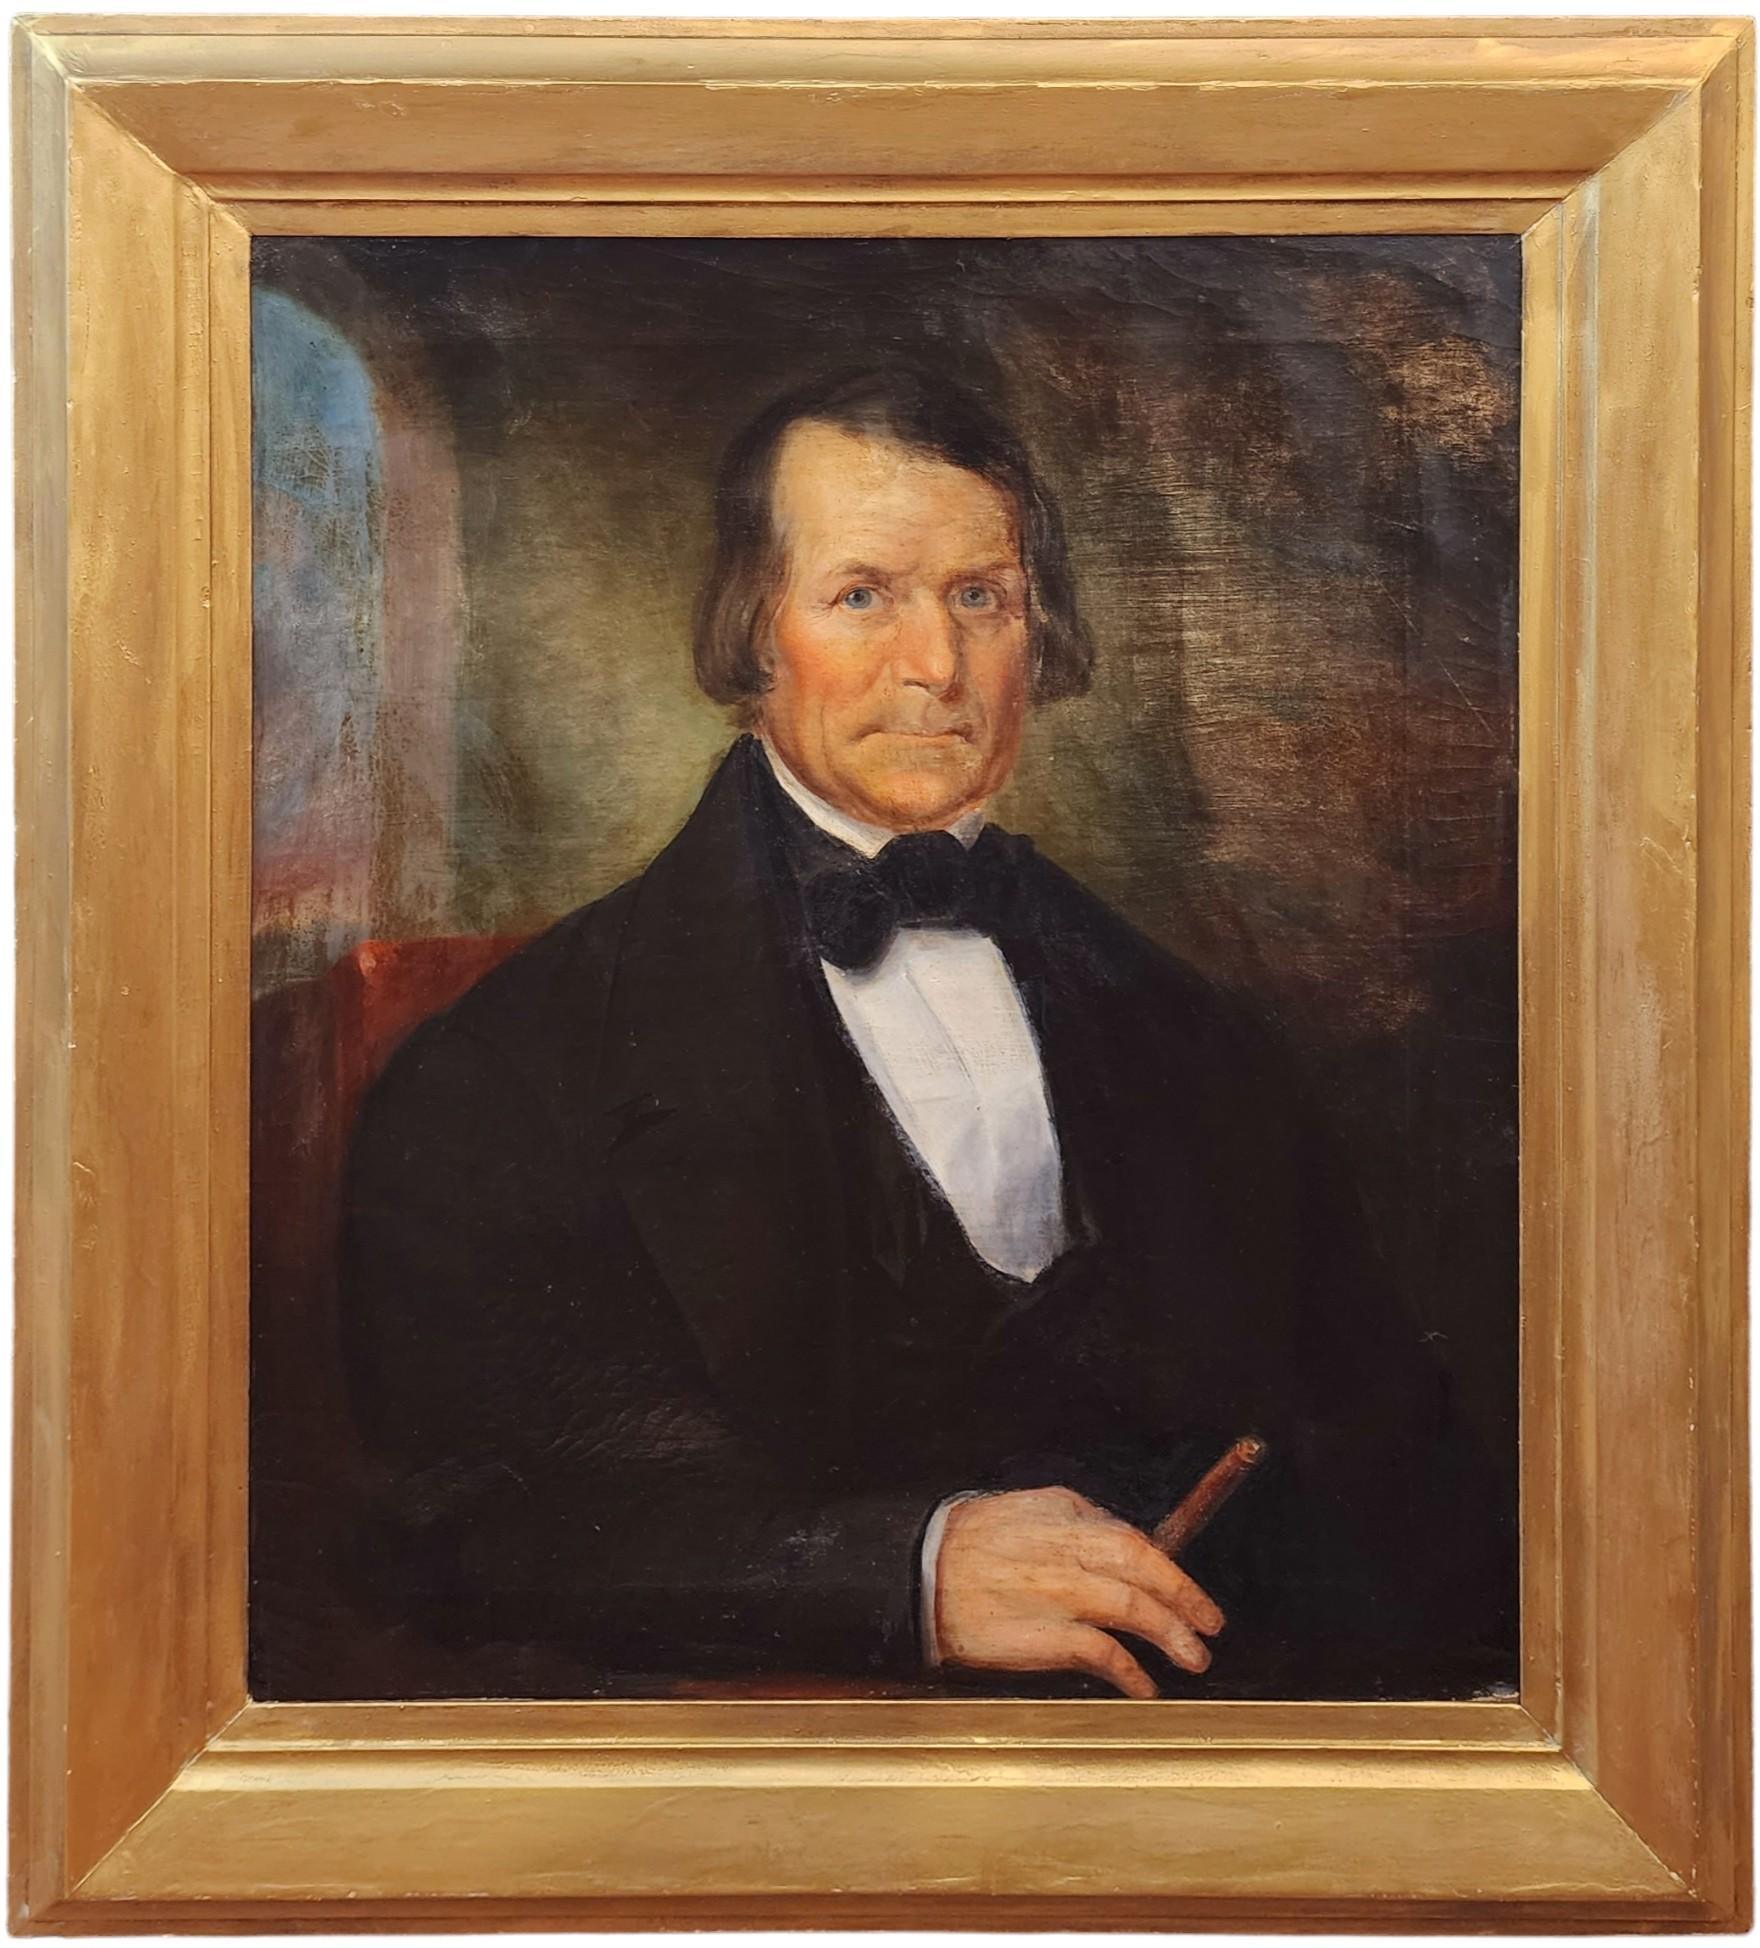 Unknown Portrait Painting - Portrait of a Man with a Cigar, Bowtie, Early American Portraiture, Smoking Man